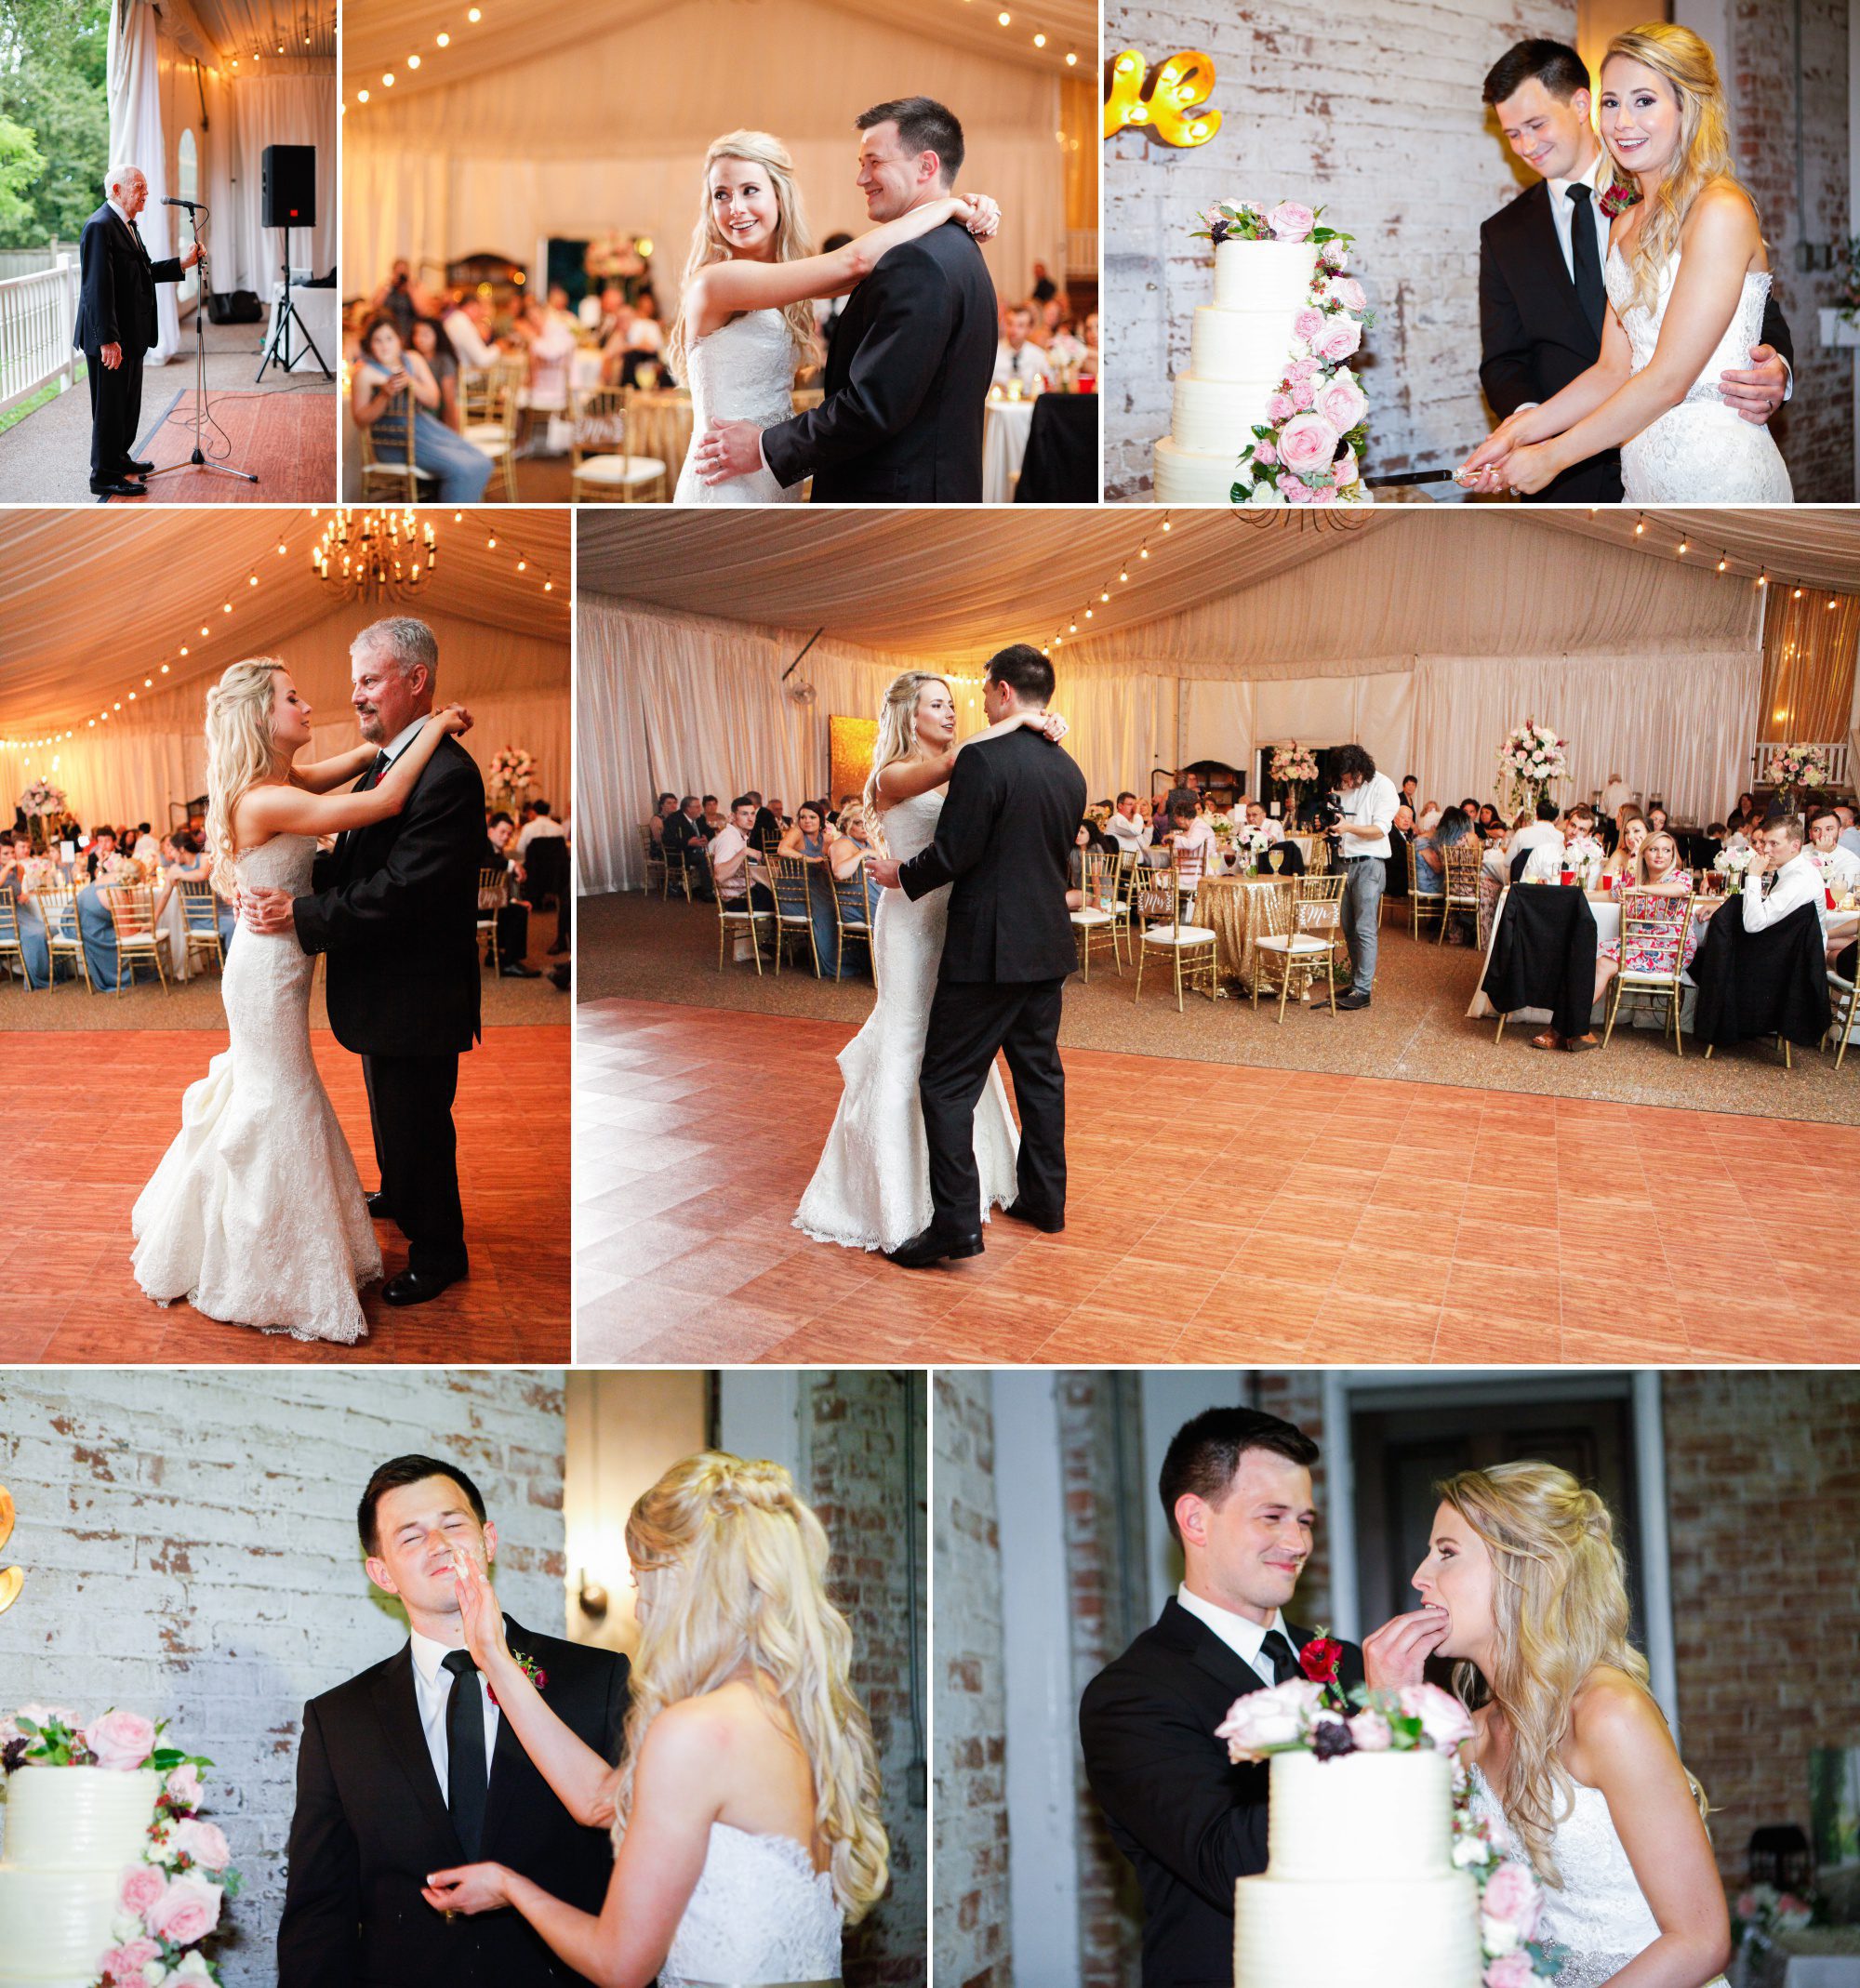 Bride and groom do first dances and cake cutting at Riverwood Mansion in Nashville, Tennessee. Photography by Krista Lee.